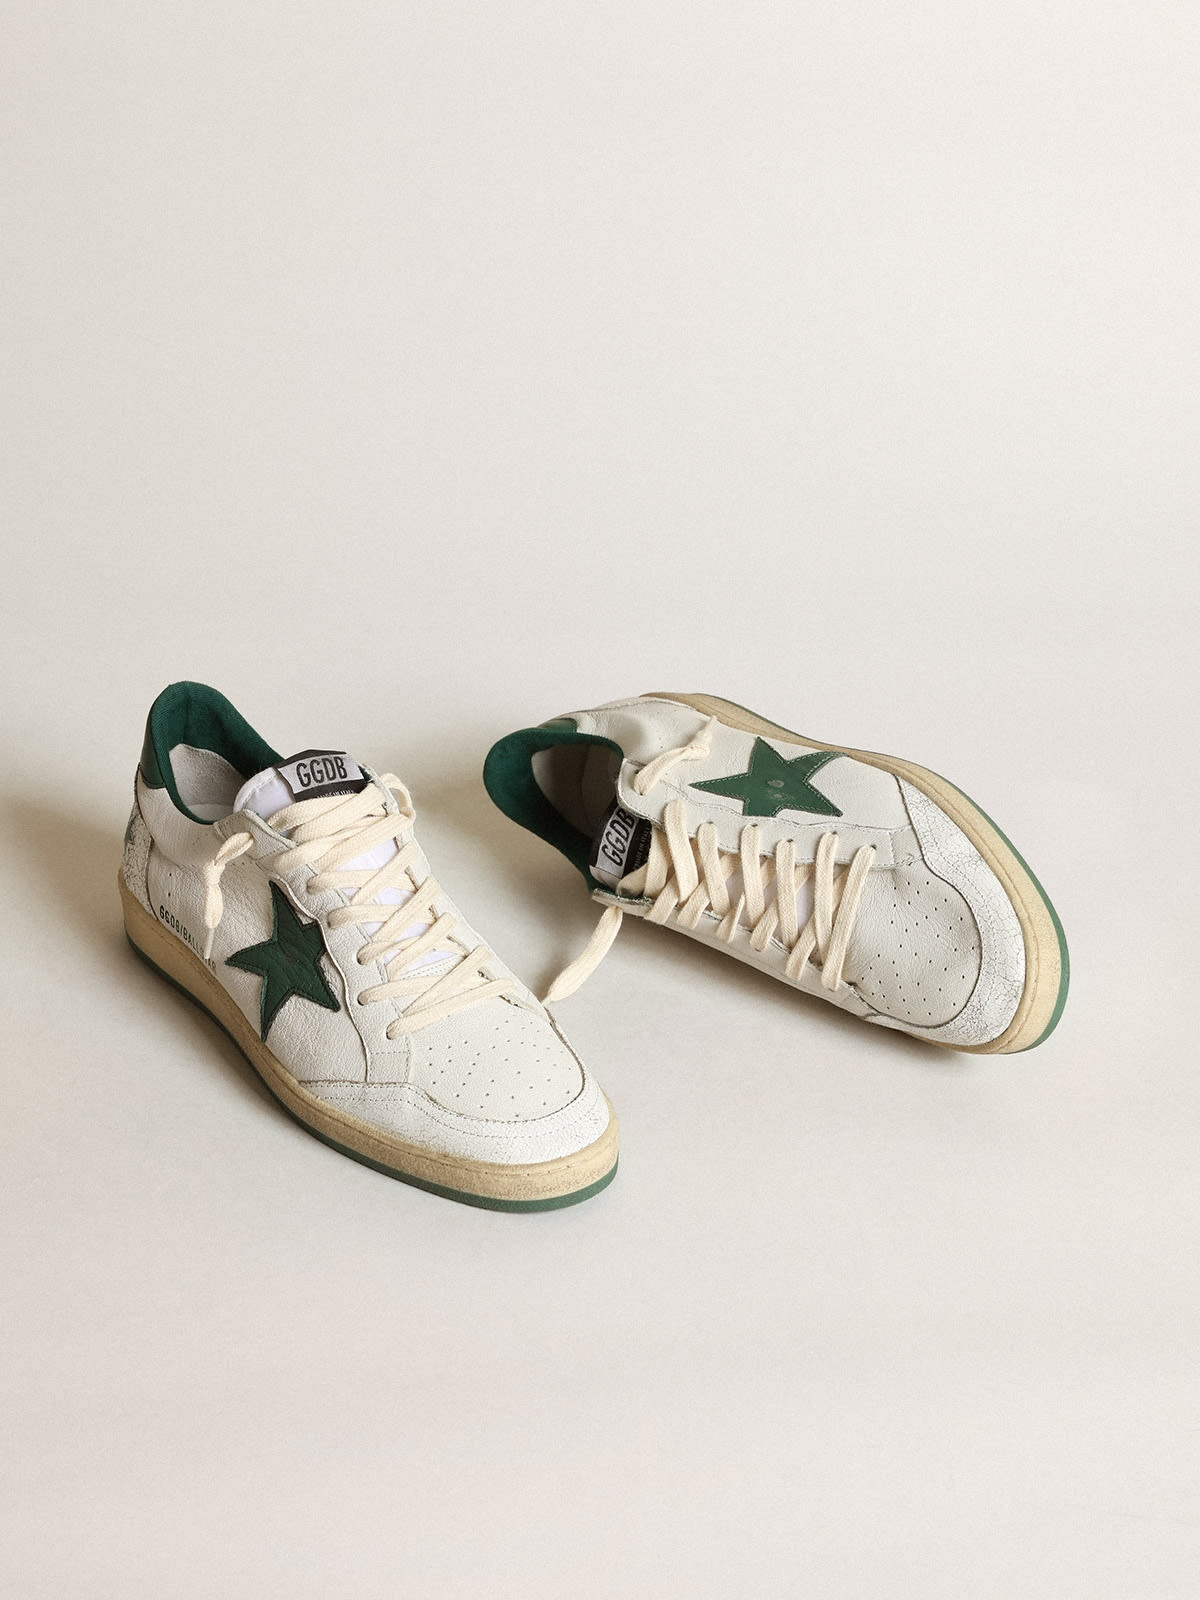 Women's Ball Star in white nappa leather with green leather star and heel tab - 2